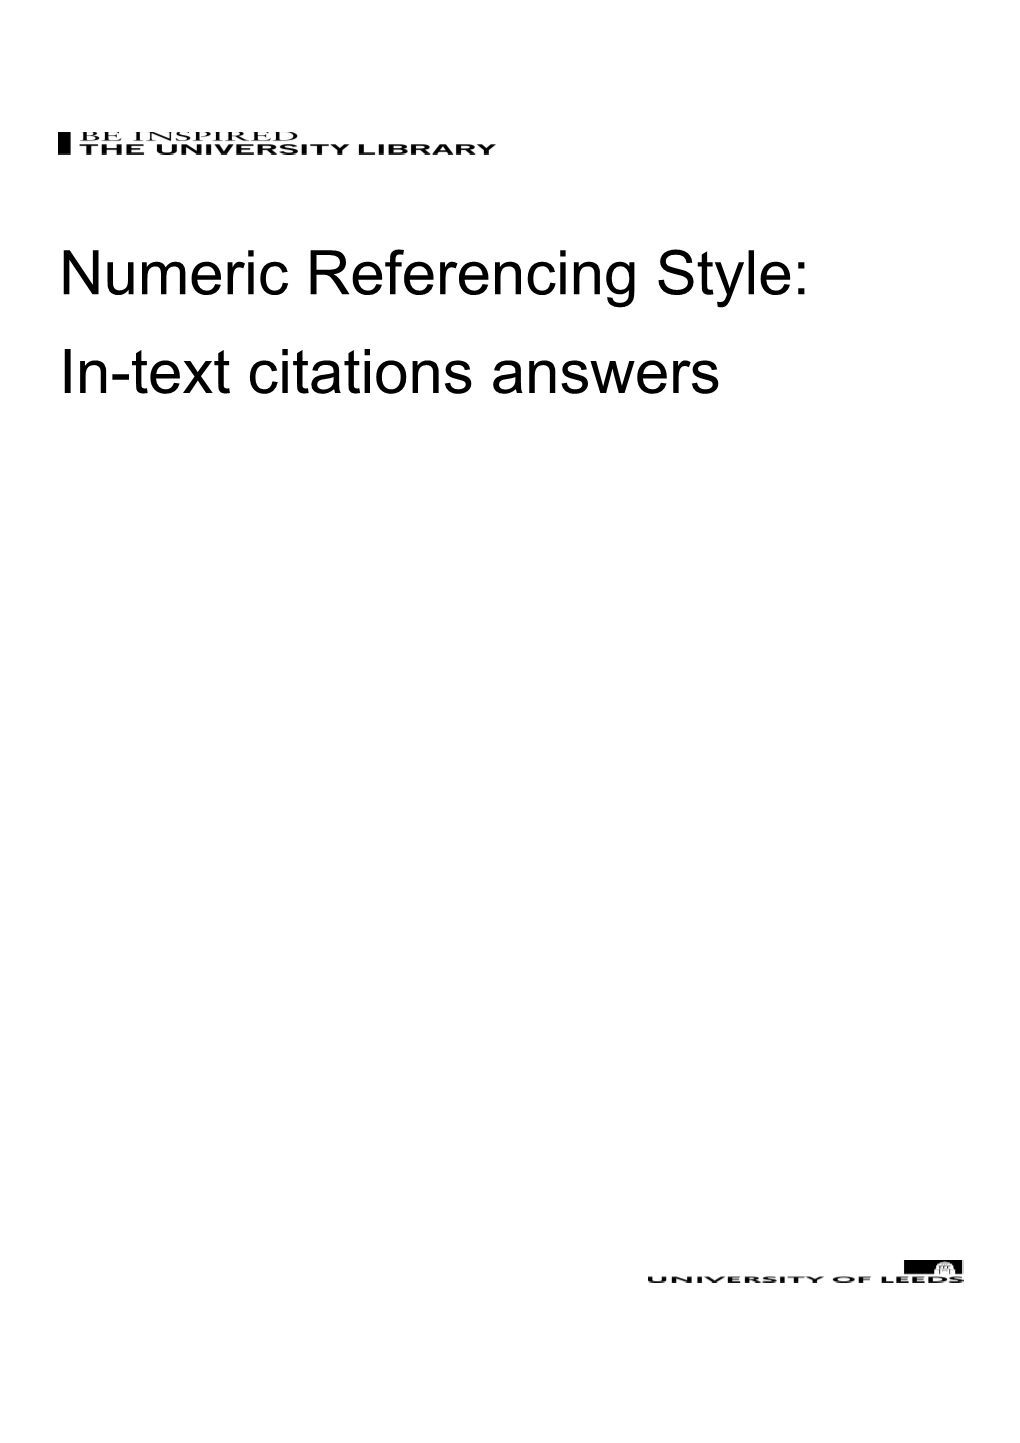 Numeric Referencing Style